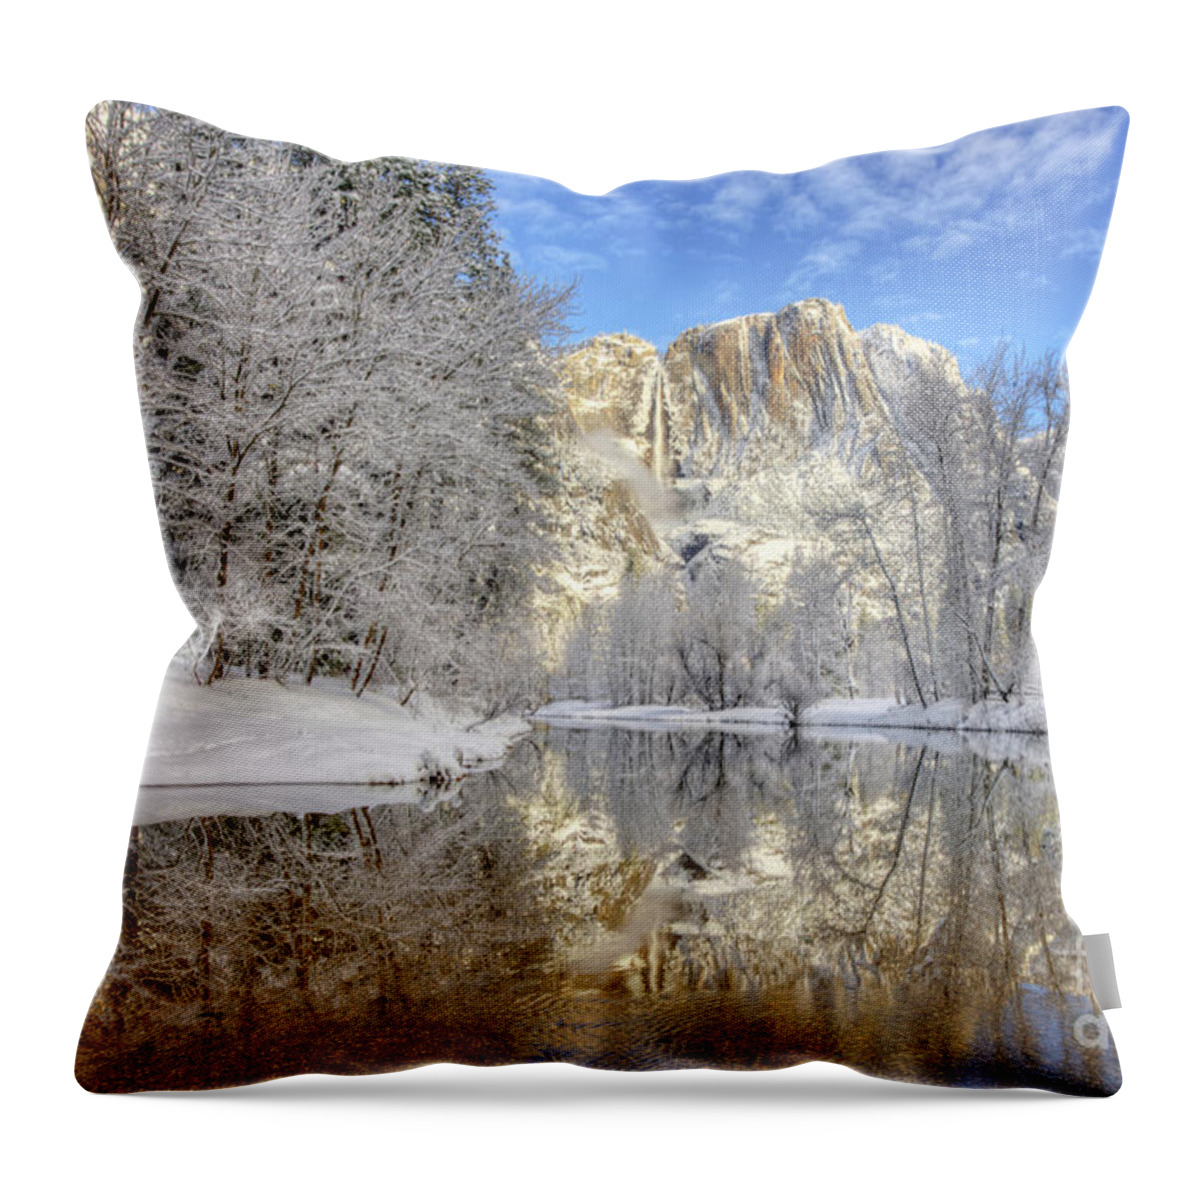 Yosemite National Park Throw Pillow featuring the photograph Horsetail Fall Reflections Winter Yosemite National Park by Wayne Moran